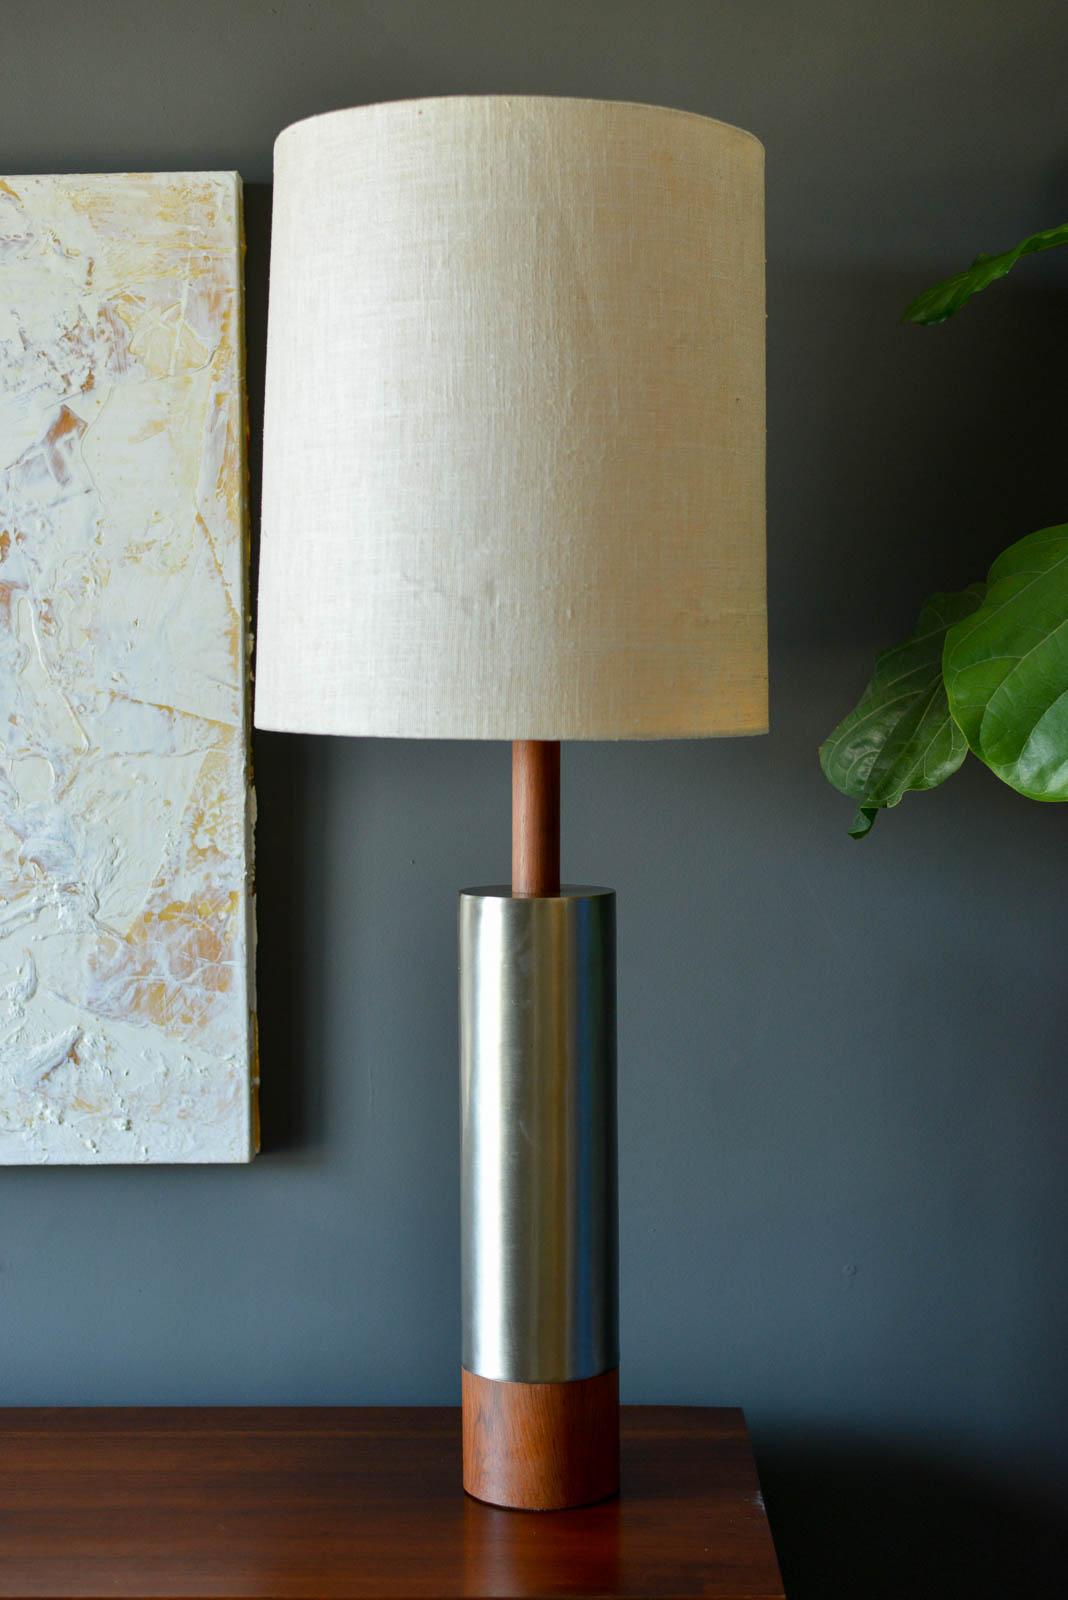 Rosewood and brushed aluminium cylinder table lamp by Laurel, circa 1970.  Original wiring, excellent original condition.

Can be seen in our Modern Vault Showroom at 361 Old Newport Blvd, Newport Beach, CA.

Measures: 35